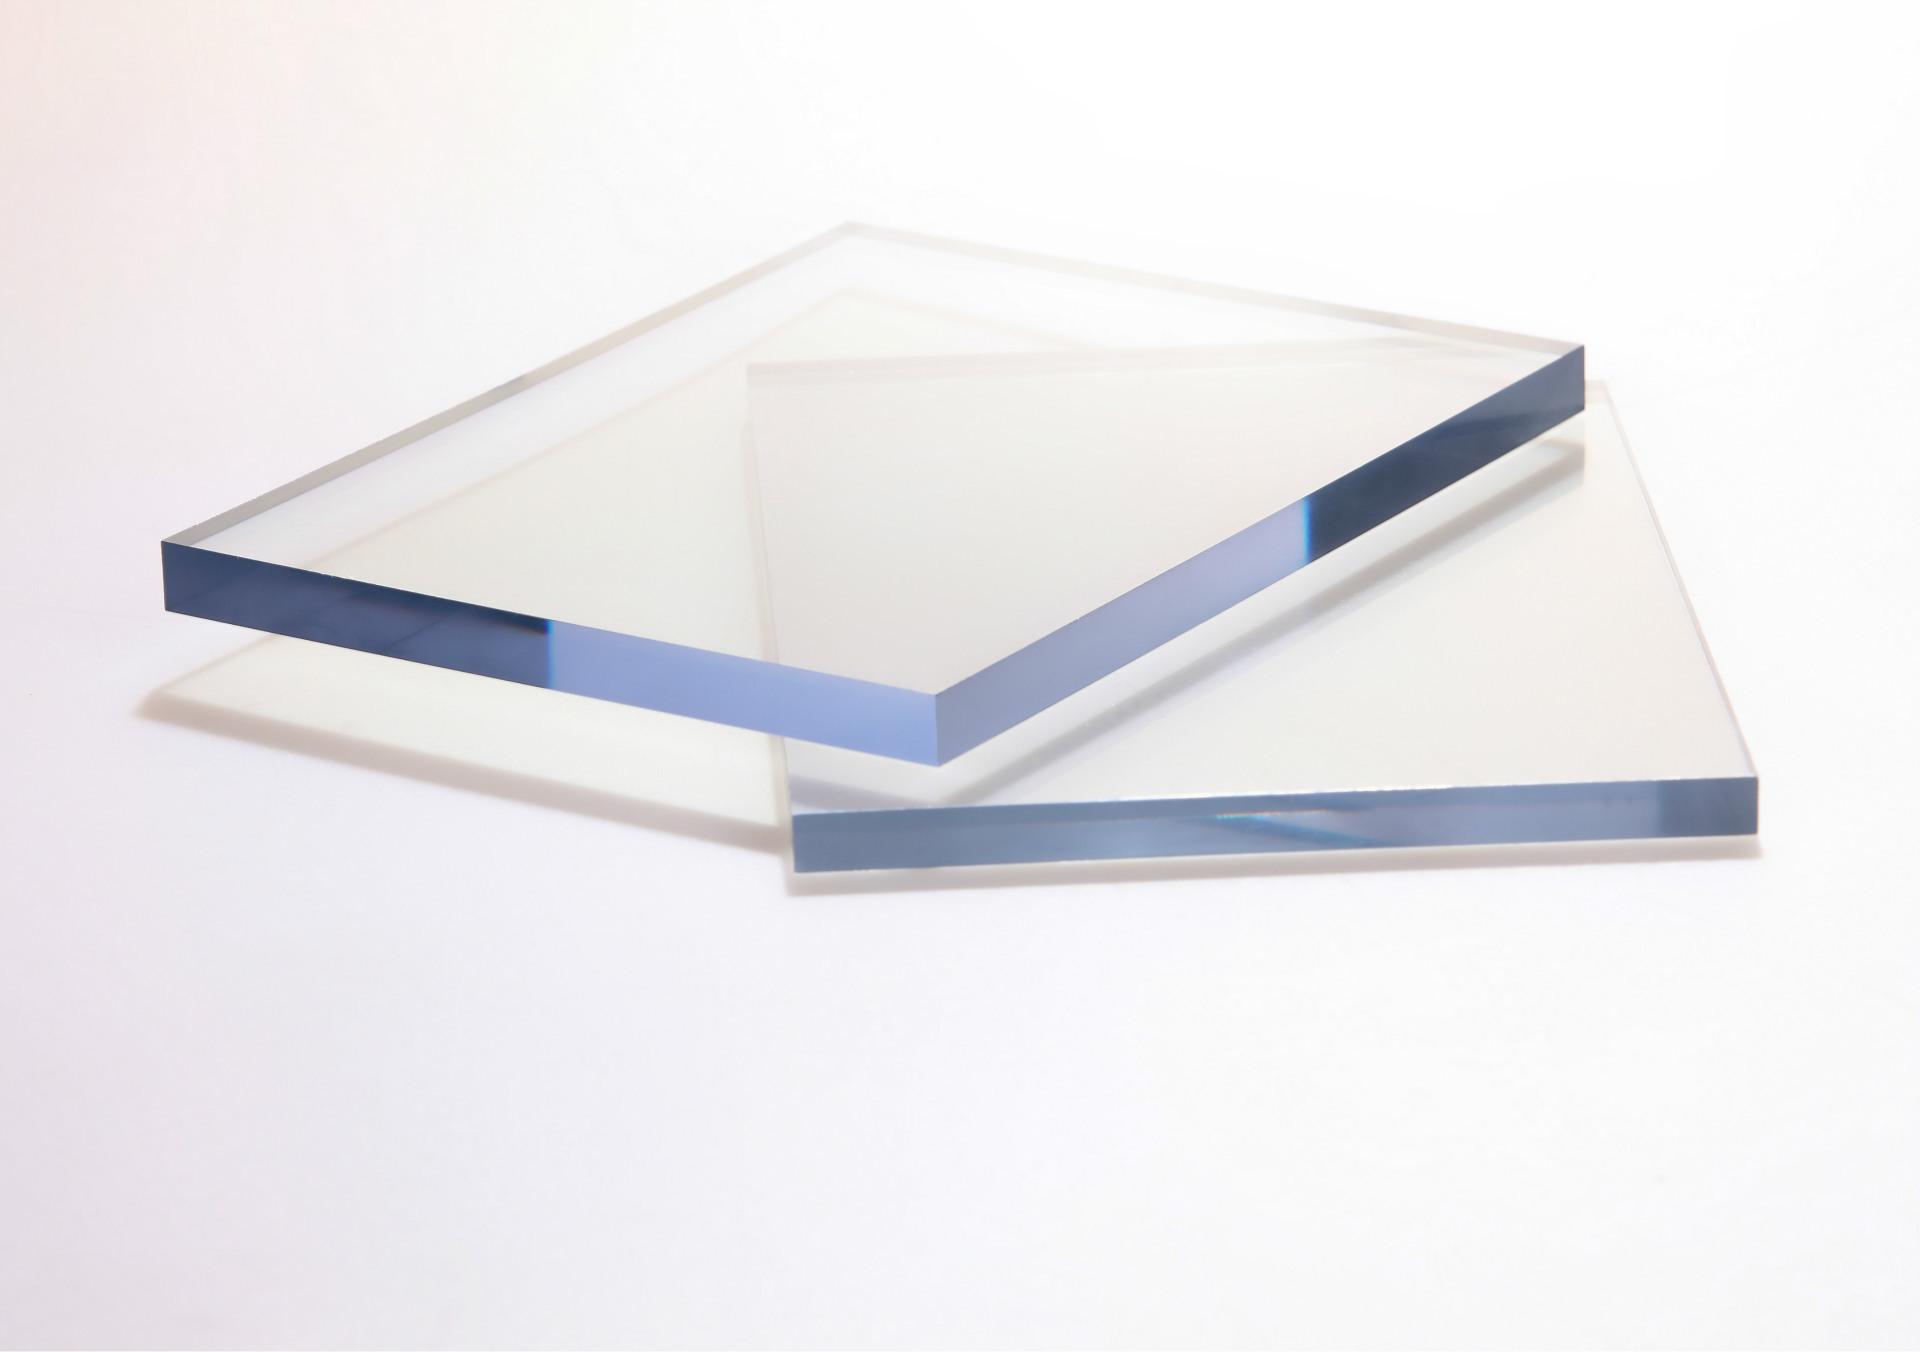 CLEAR POLYCARBONATE SHEET 1MM